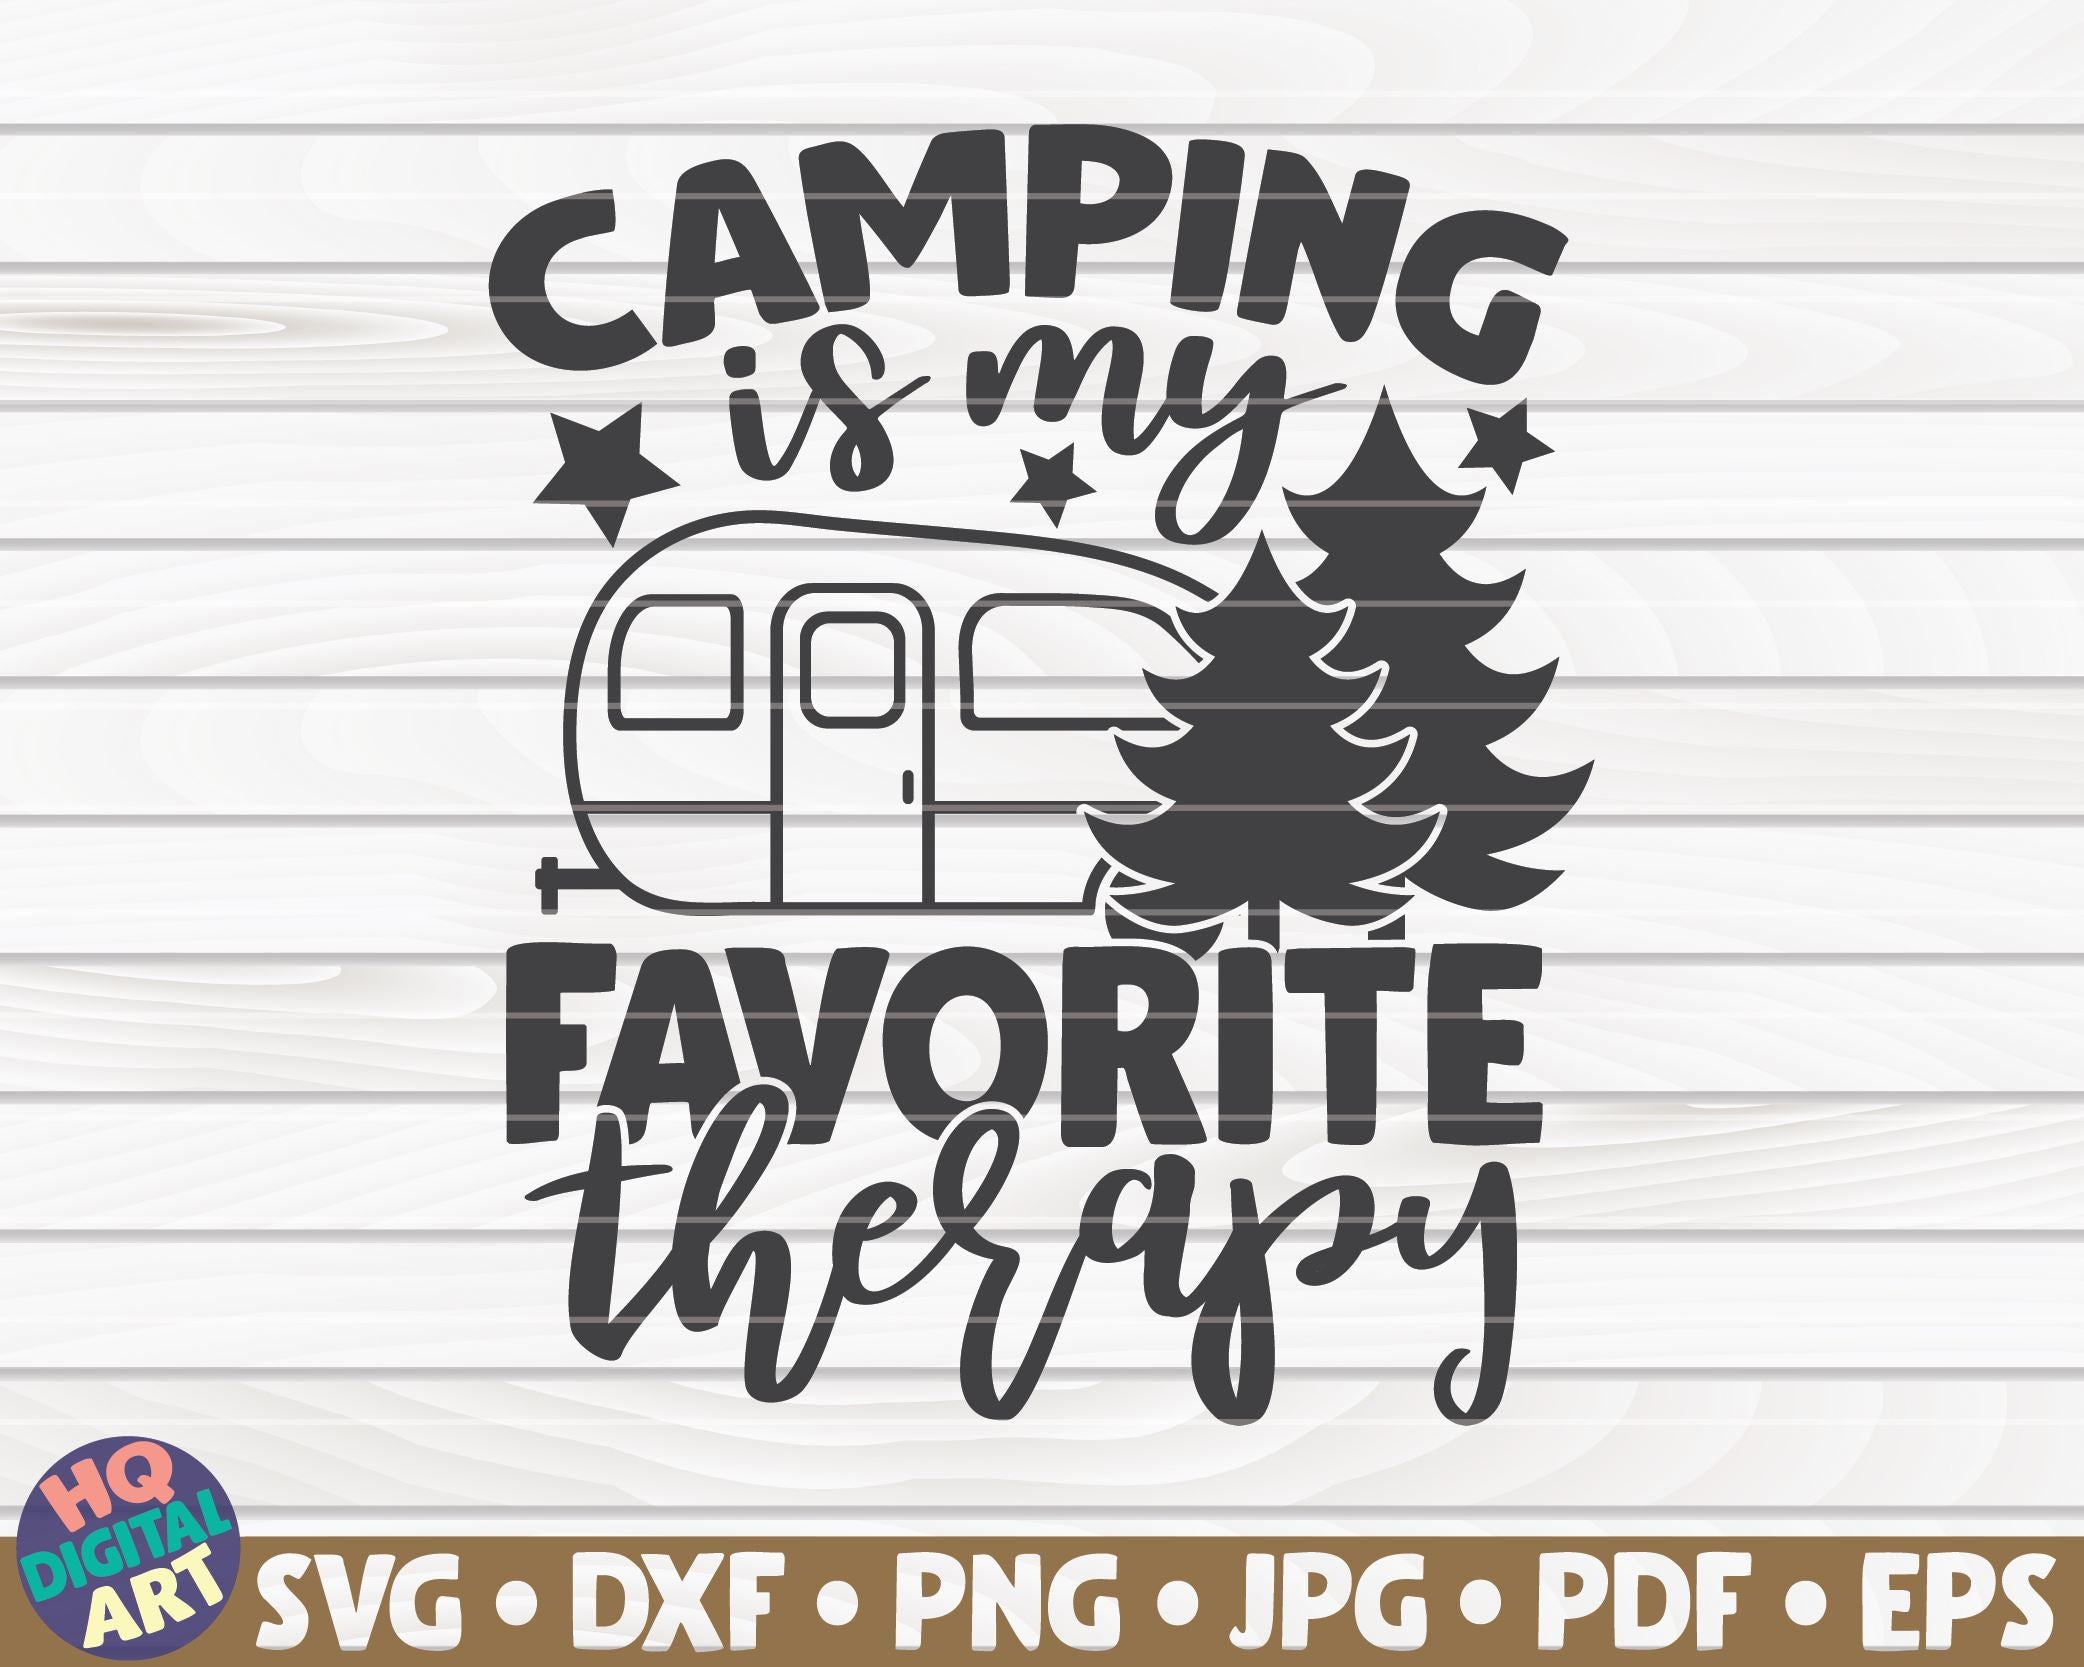 Camping Saying Svg Camping Is My Favorite Therapy Svg File Funny Camping Svg Vector Printable Clipart Camping Quote Svg Clip Art Art Collectibles Thienhop Com